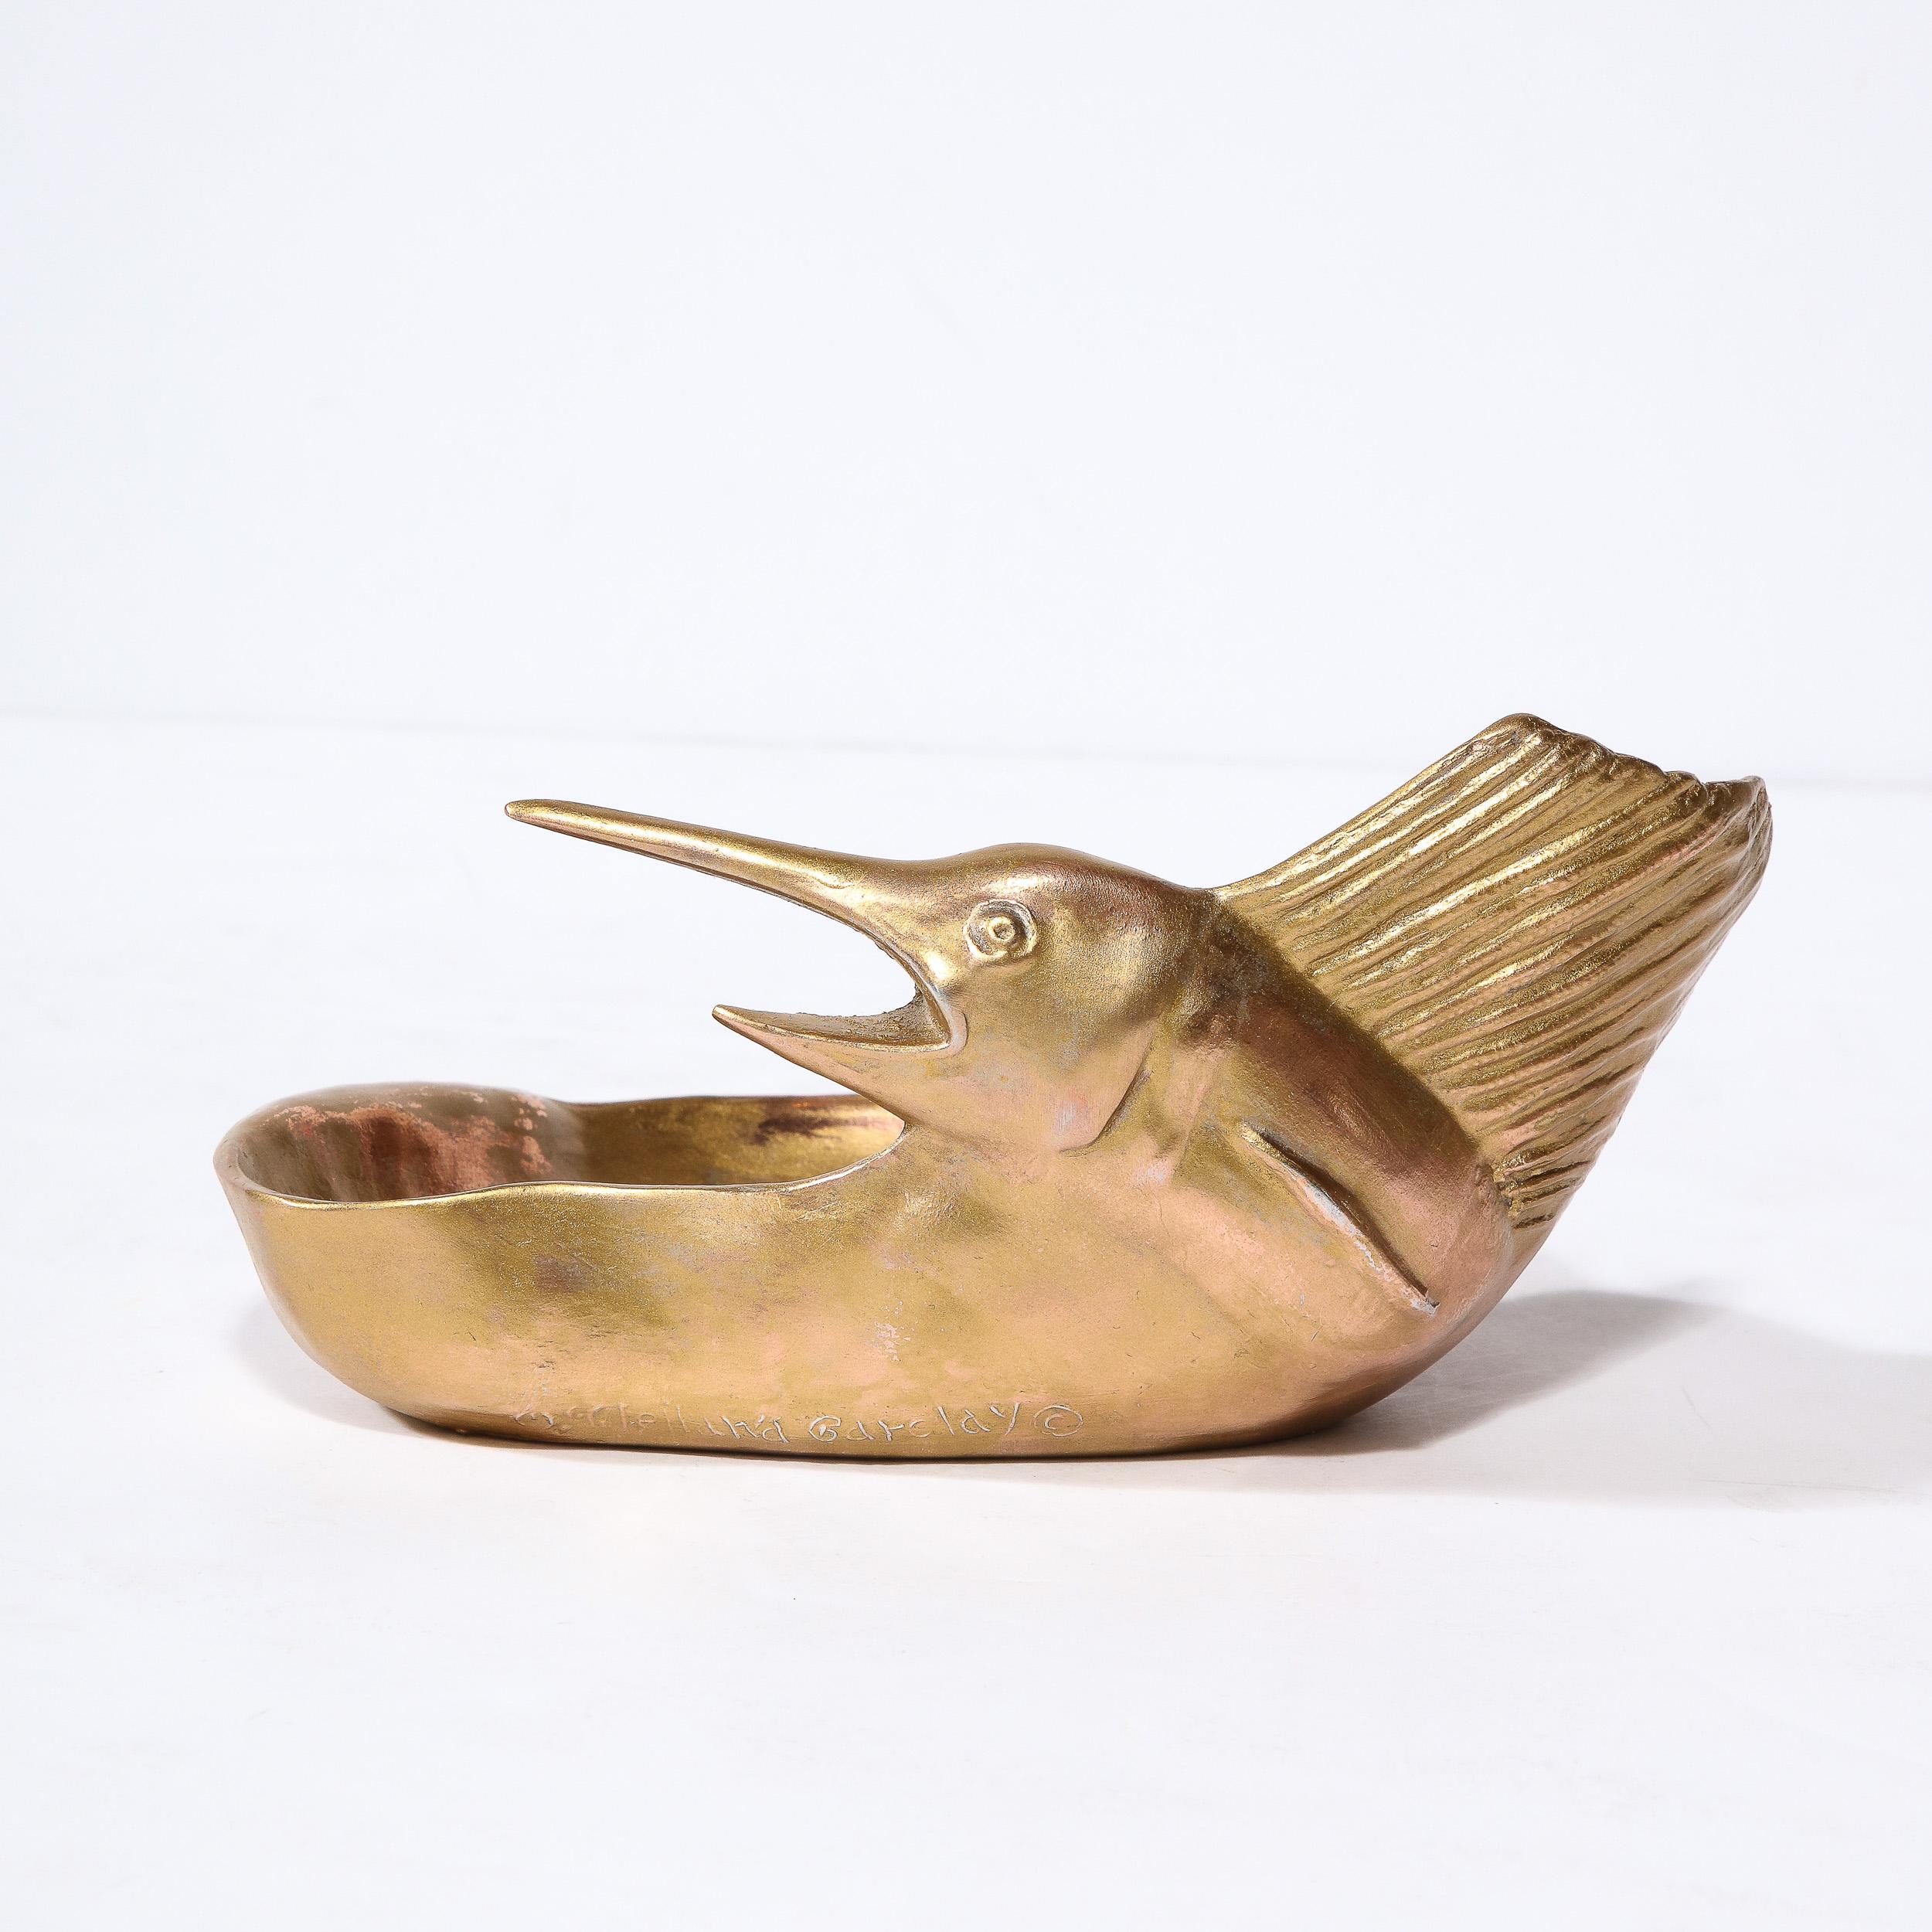 Modernist Sculptural Gilded Dish with Swordfish Motif in Relief In Good Condition For Sale In New York, NY